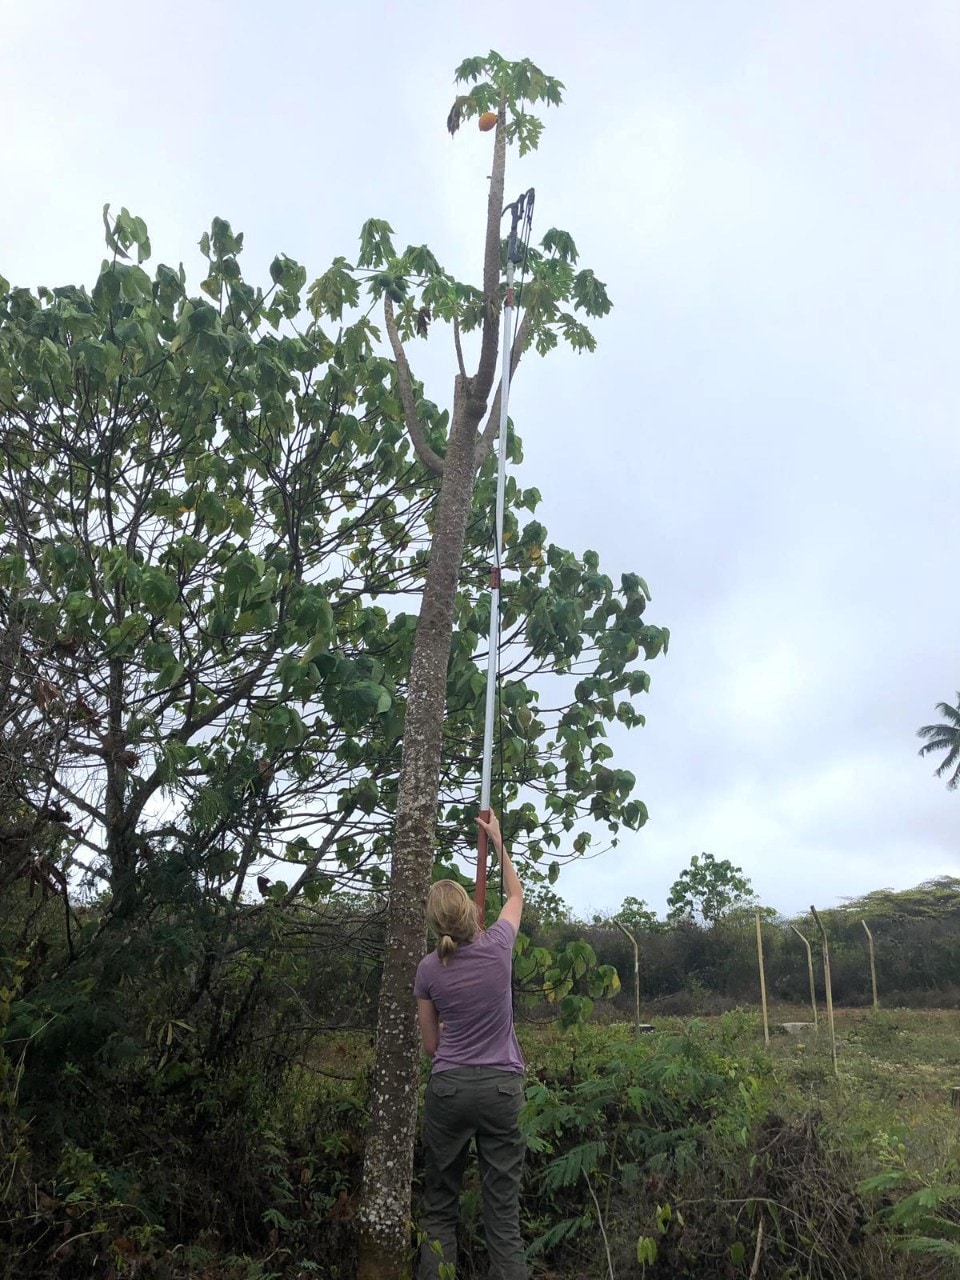 PhD student Laura Pulscher collecting a papaya fruit for nutritional analysis.